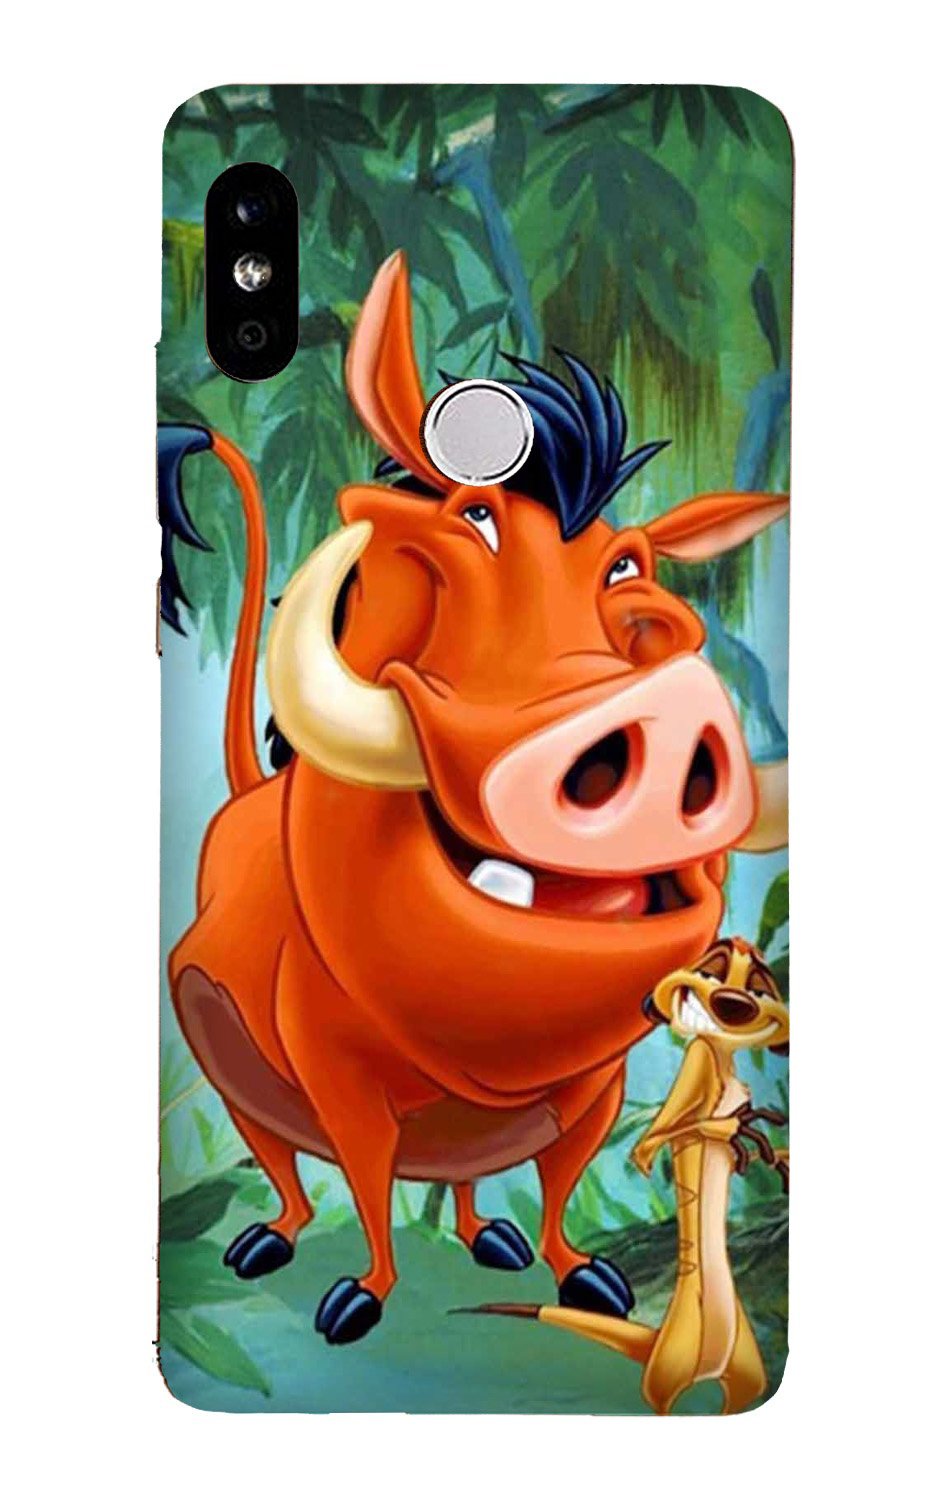 Timon and Pumbaa Mobile Back Case for Xiaomi Redmi Note 7/Note 7 Pro  (Design - 305)